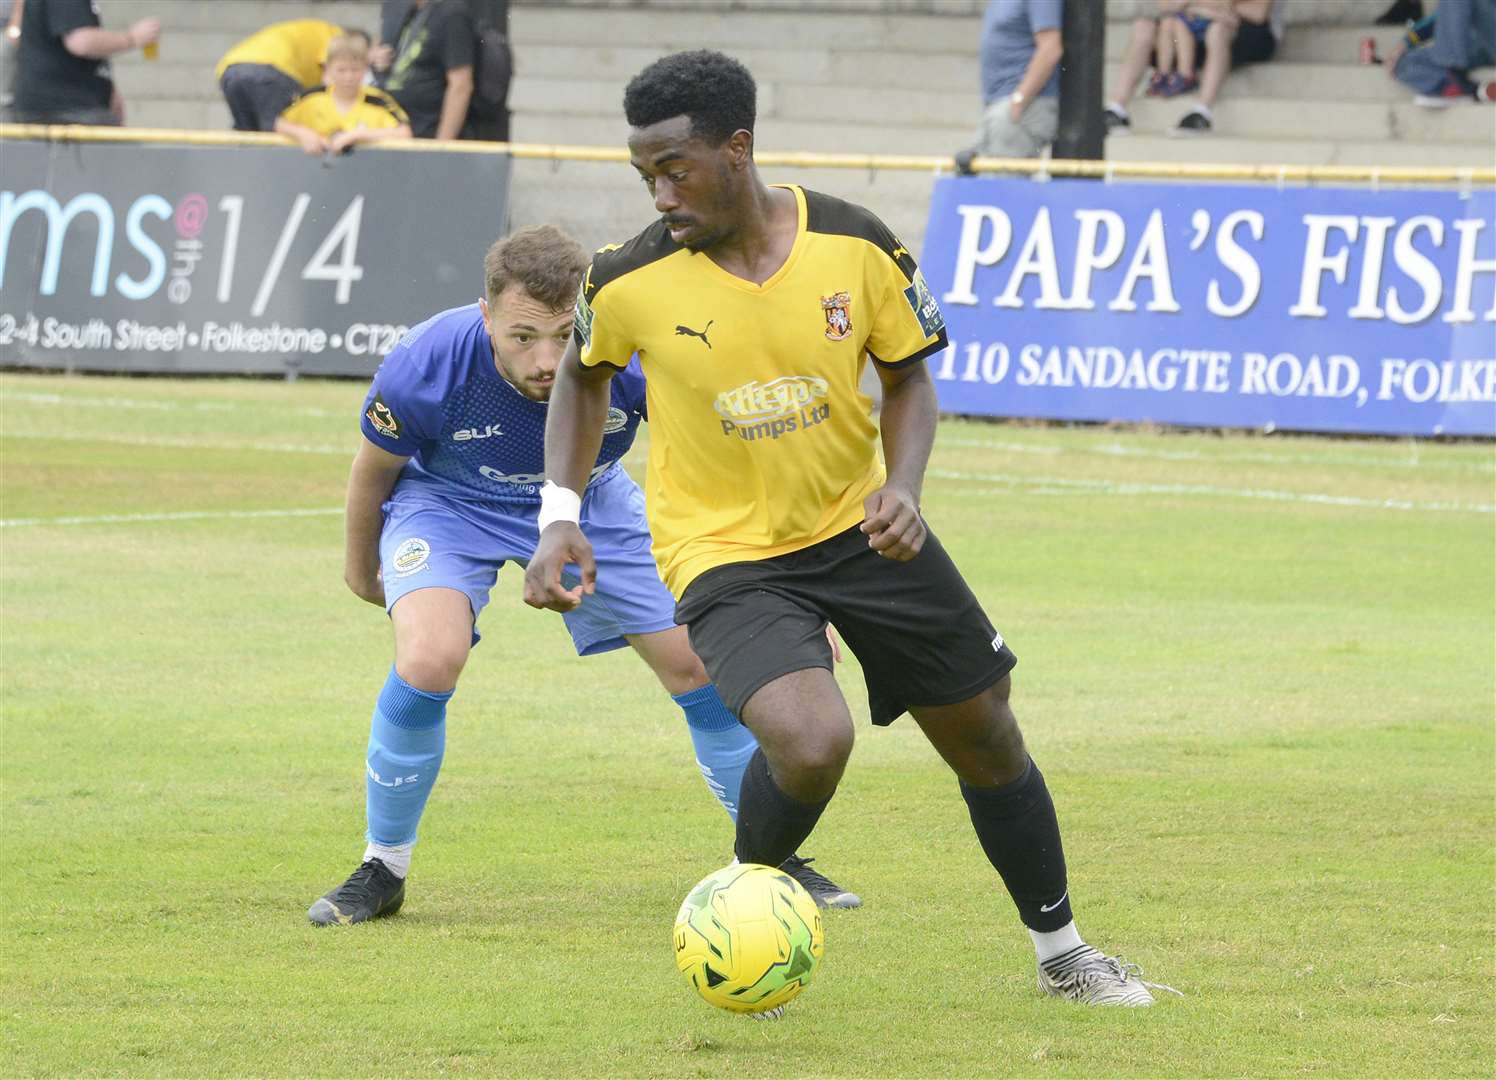 Ira Jackson has made a good start to the season at Folkestone Picture: Paul Amos